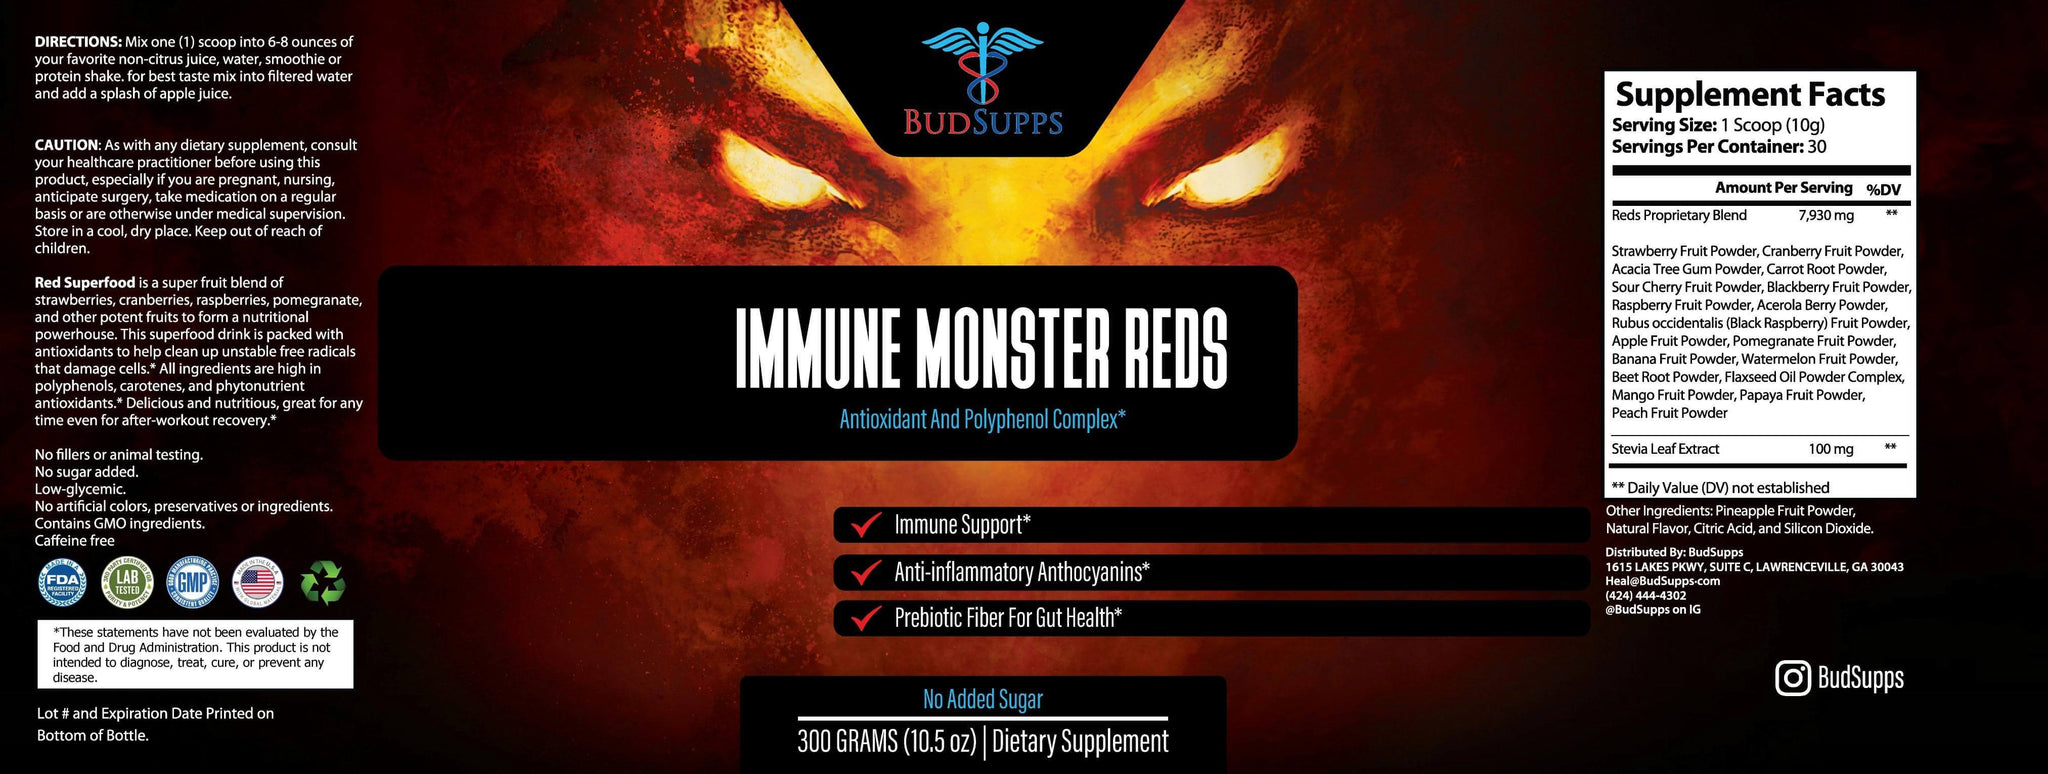 Monster Reds (Antioxidant And Phenol Complex)